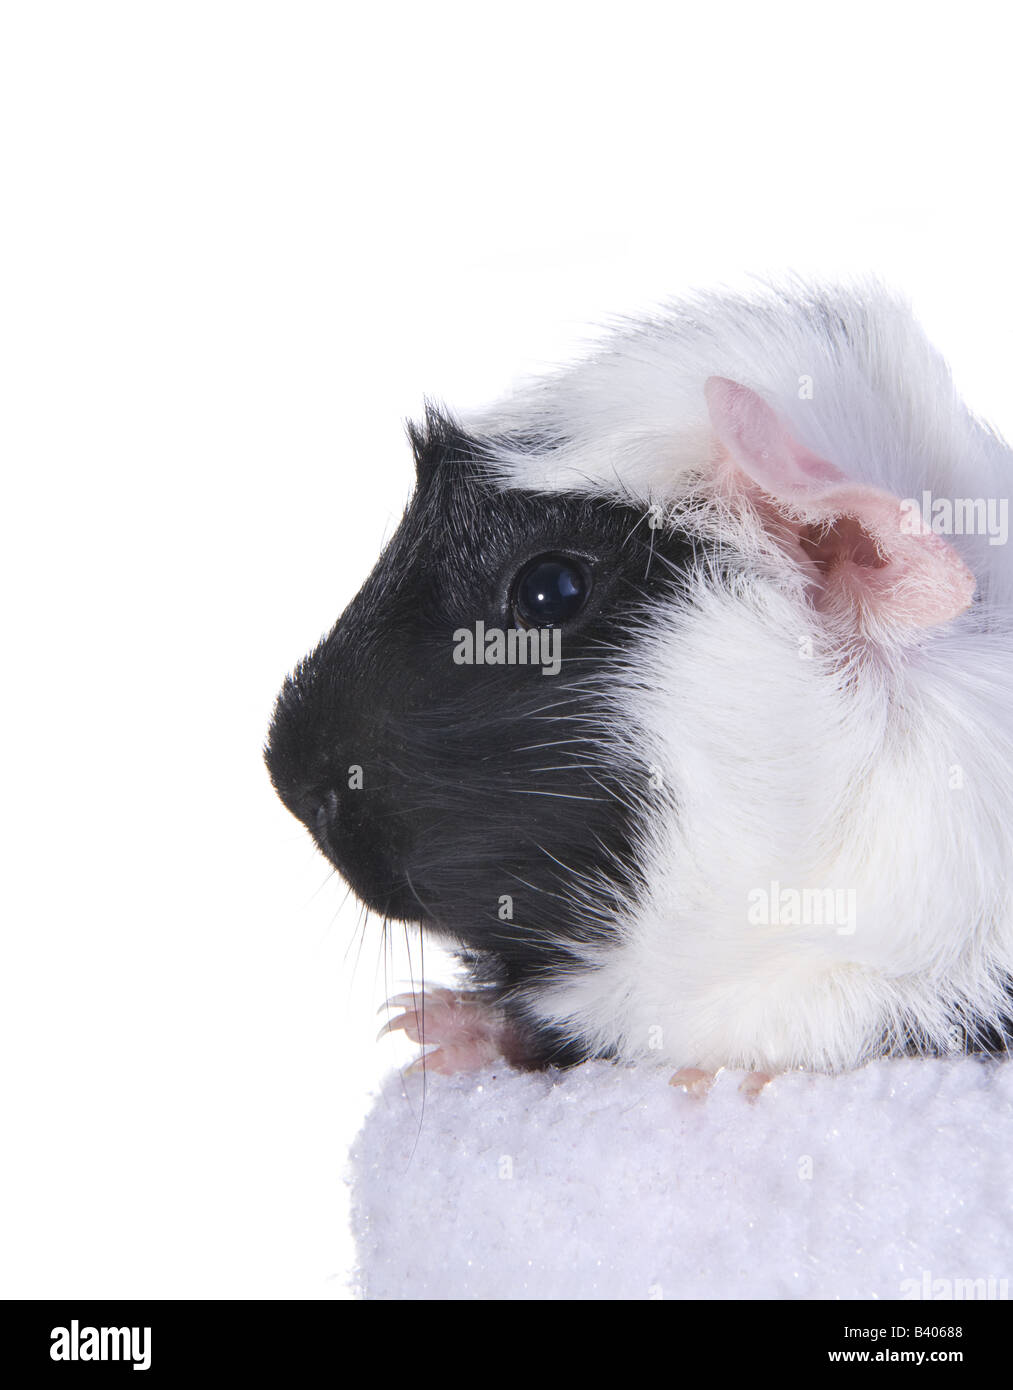 Cute Black and white Guinea pig or Cavy profile Stock Photo